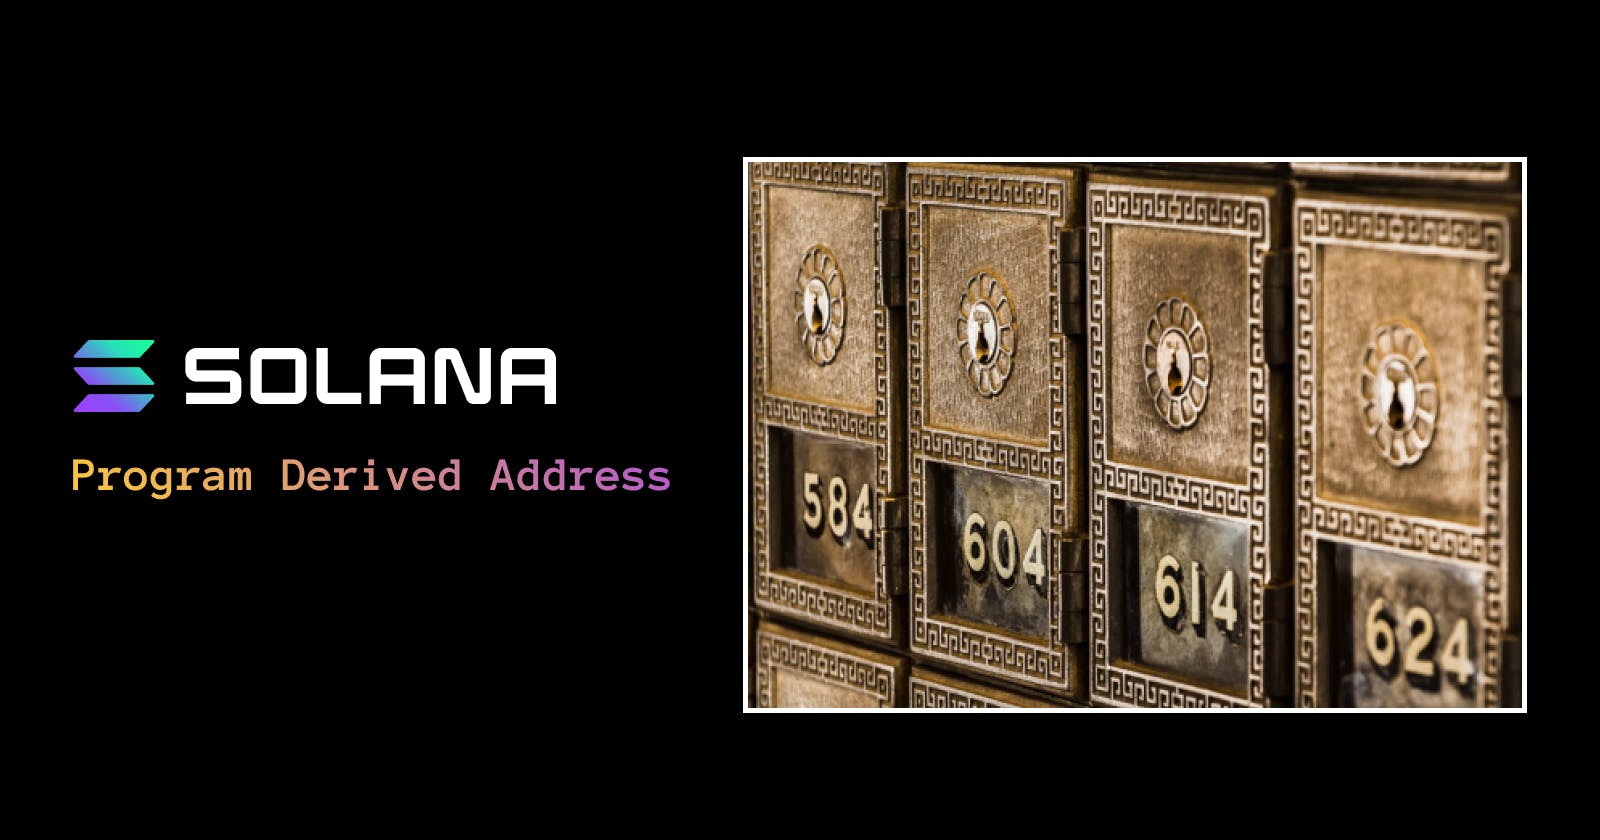 Solana - What is a Program Derived Address?